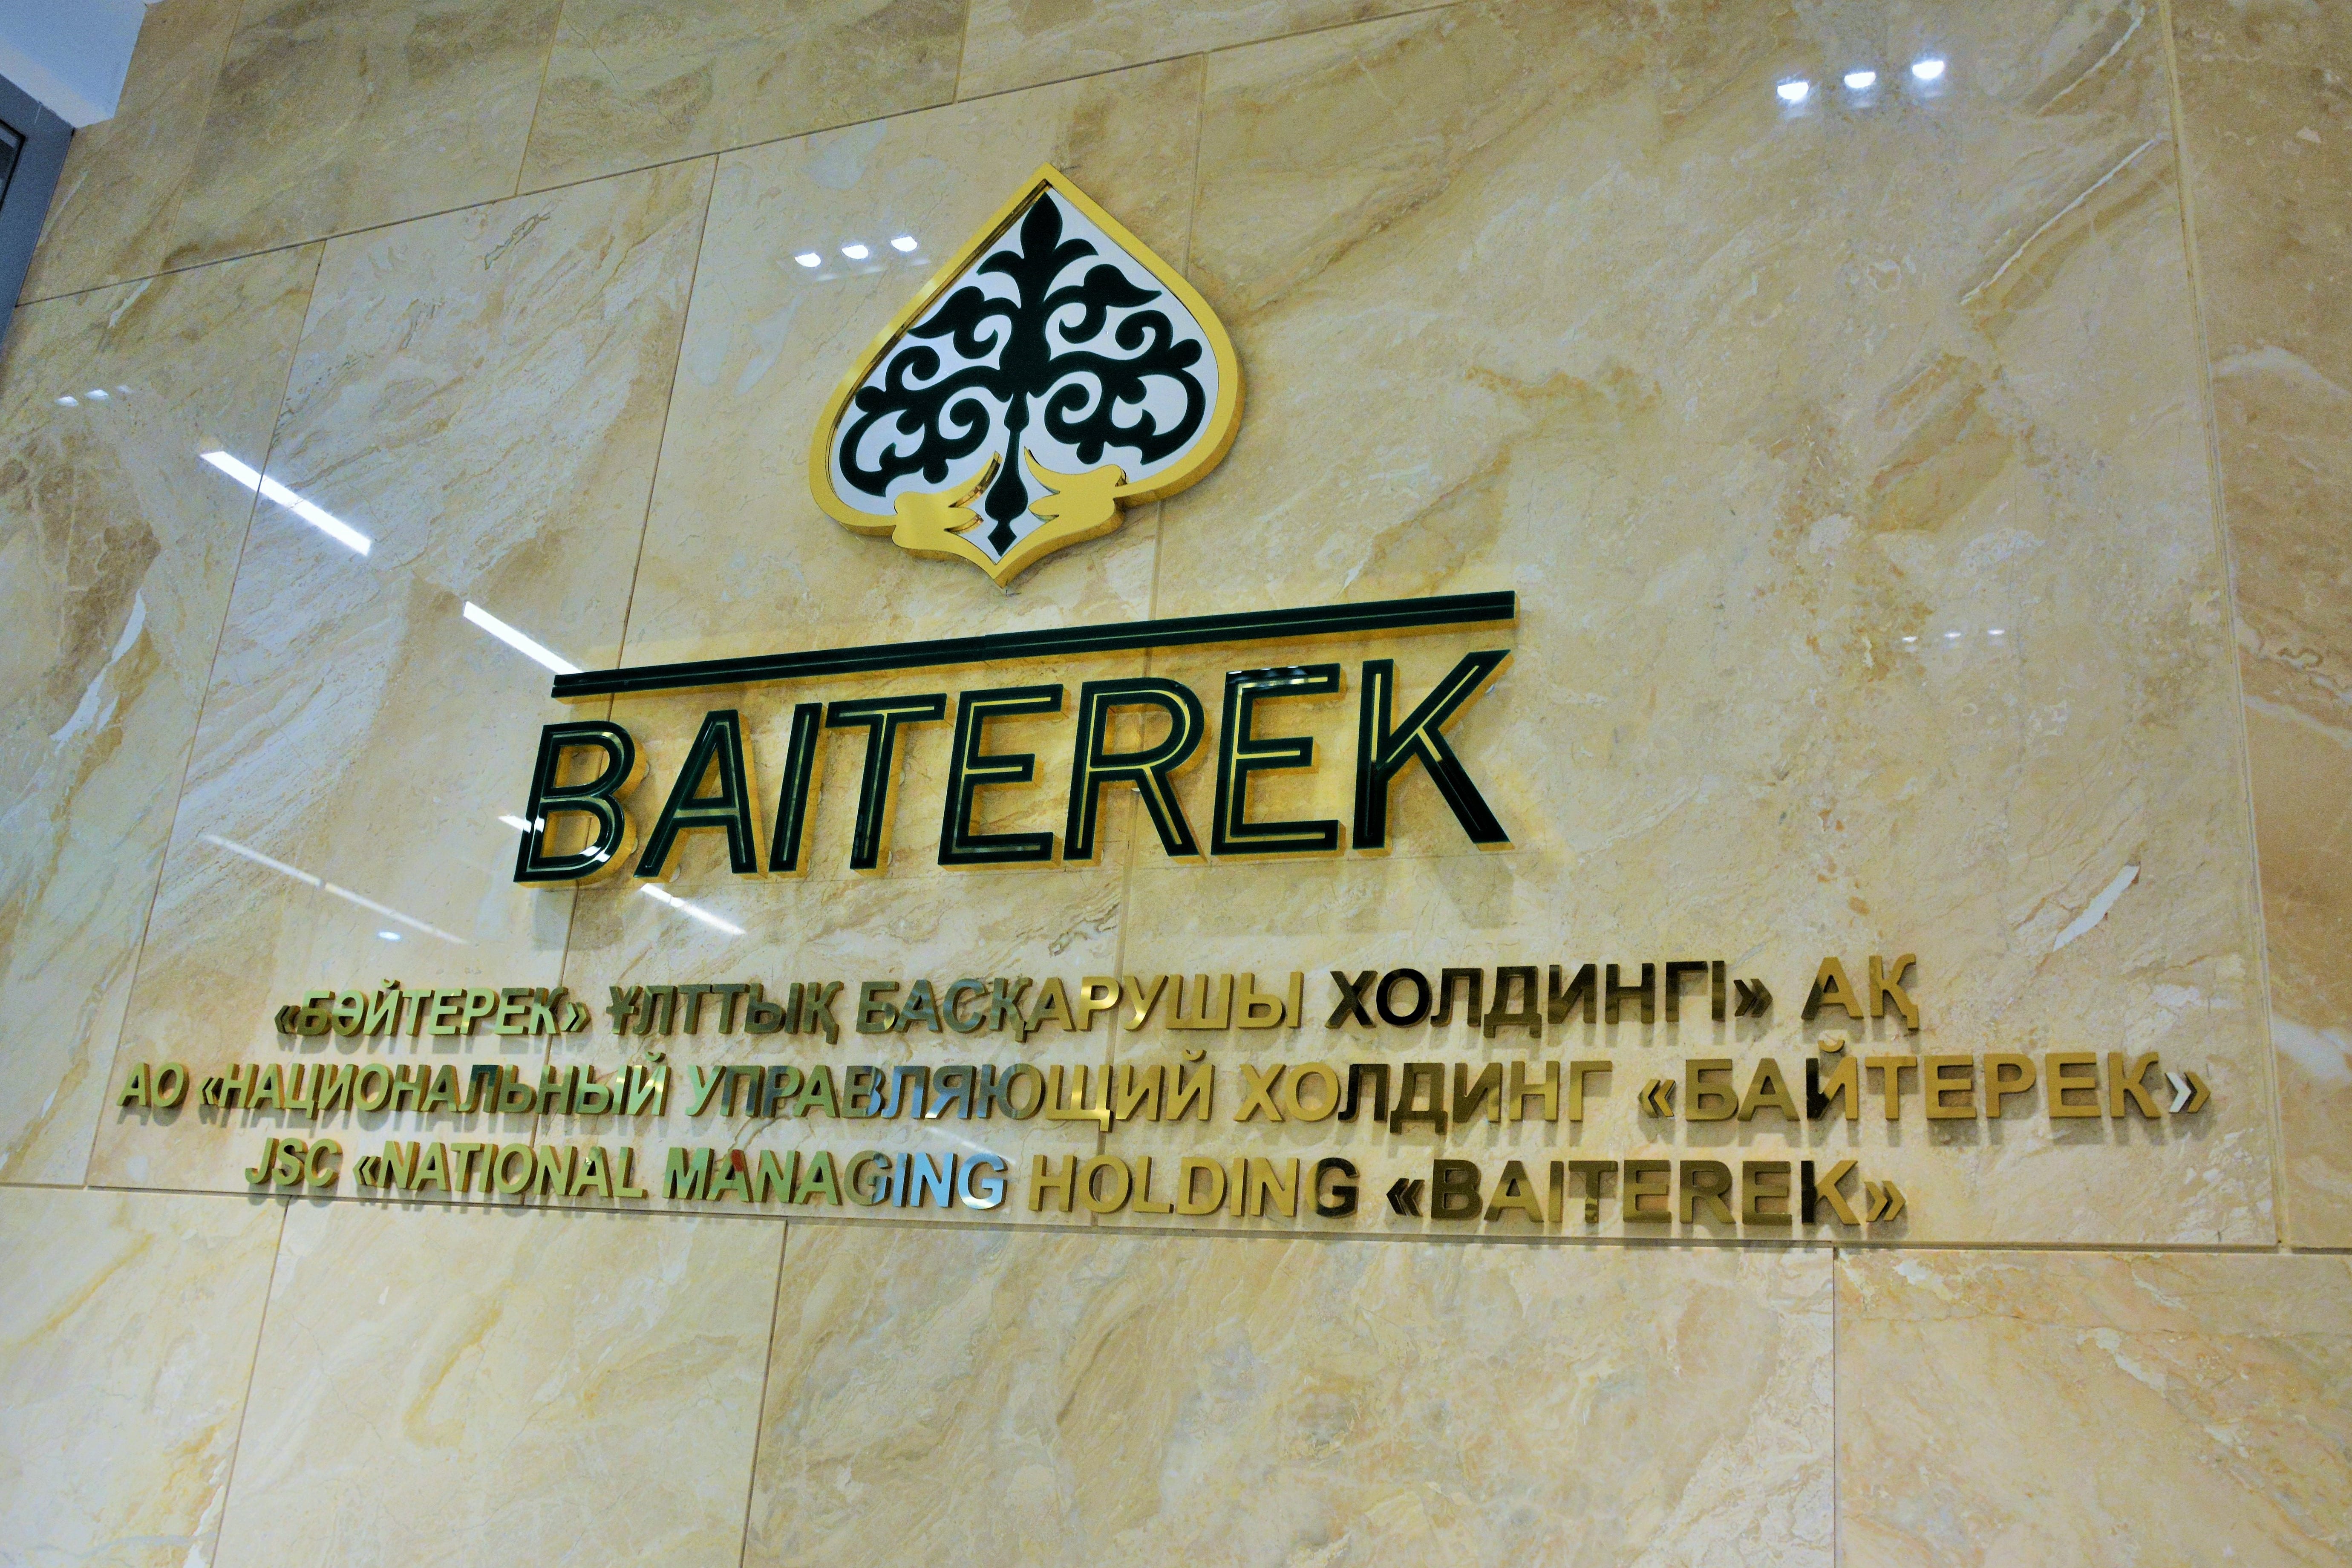 Baiterek Holding began supporting the agro-industrial complex